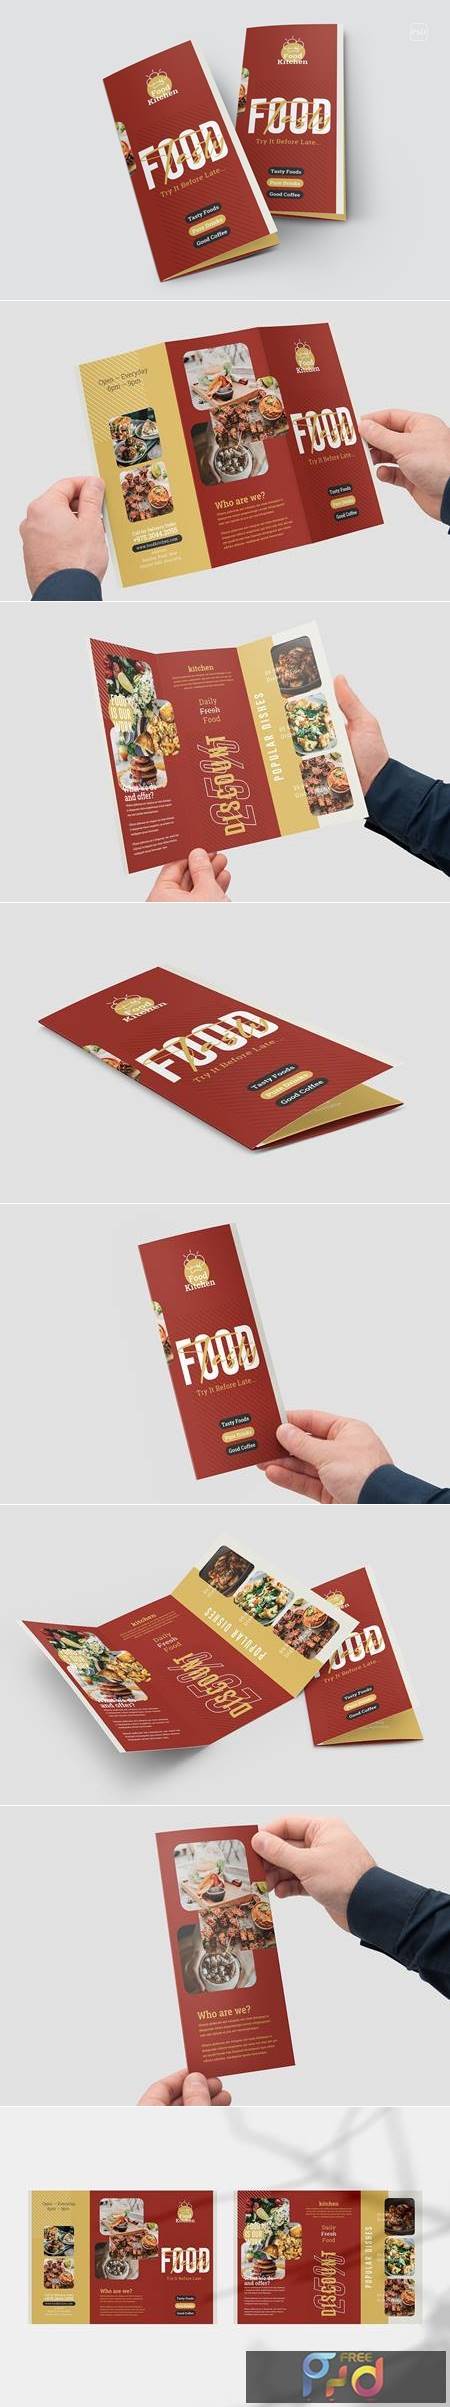 Food Trifold Brochure S5YJWYC 1